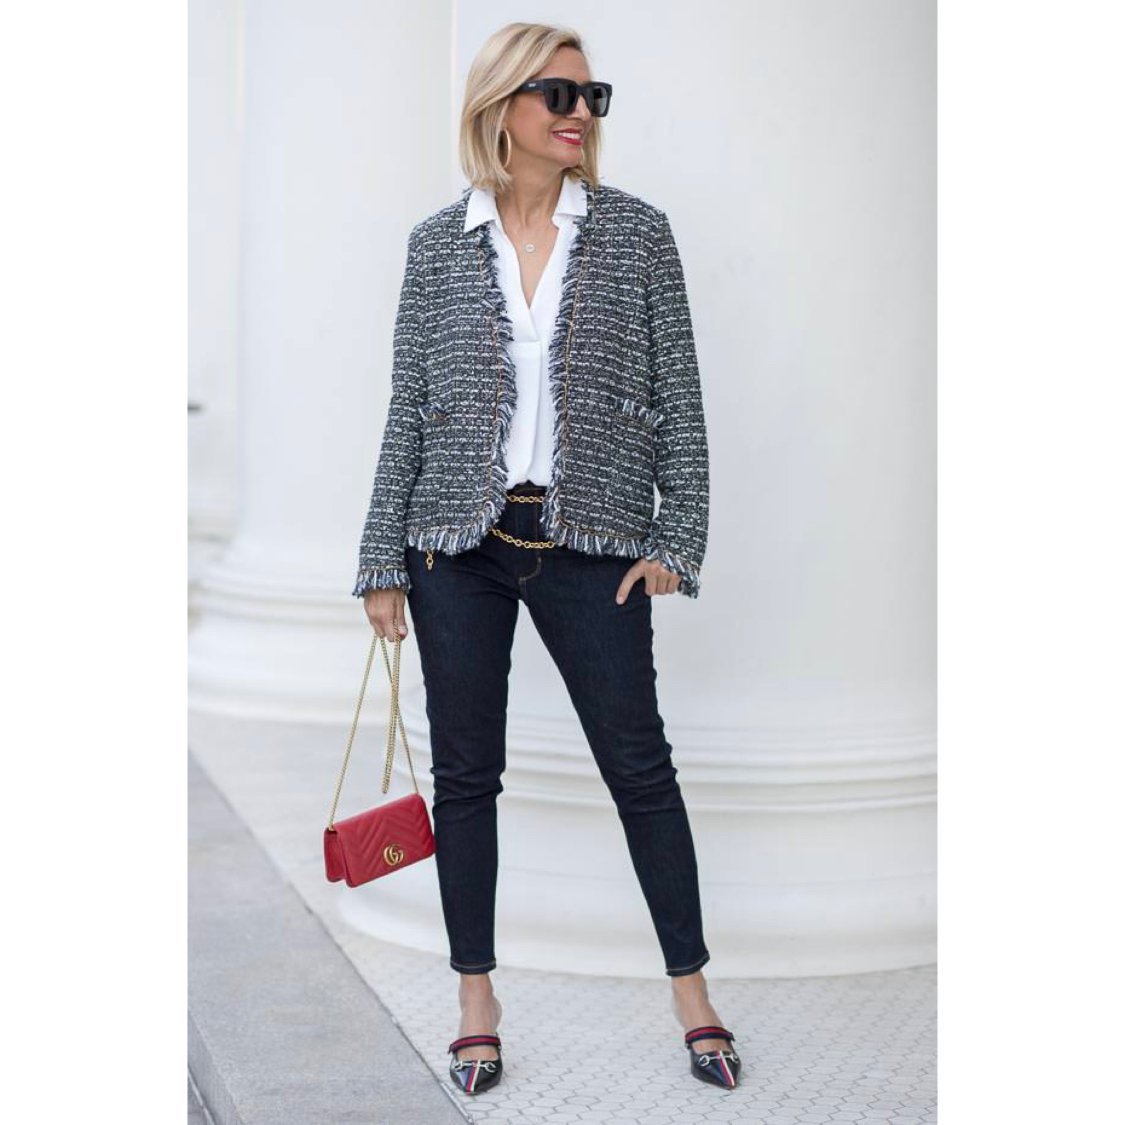 CHANEL TWEED DOUBLE-BREASTED JACKET - Janet Mandell